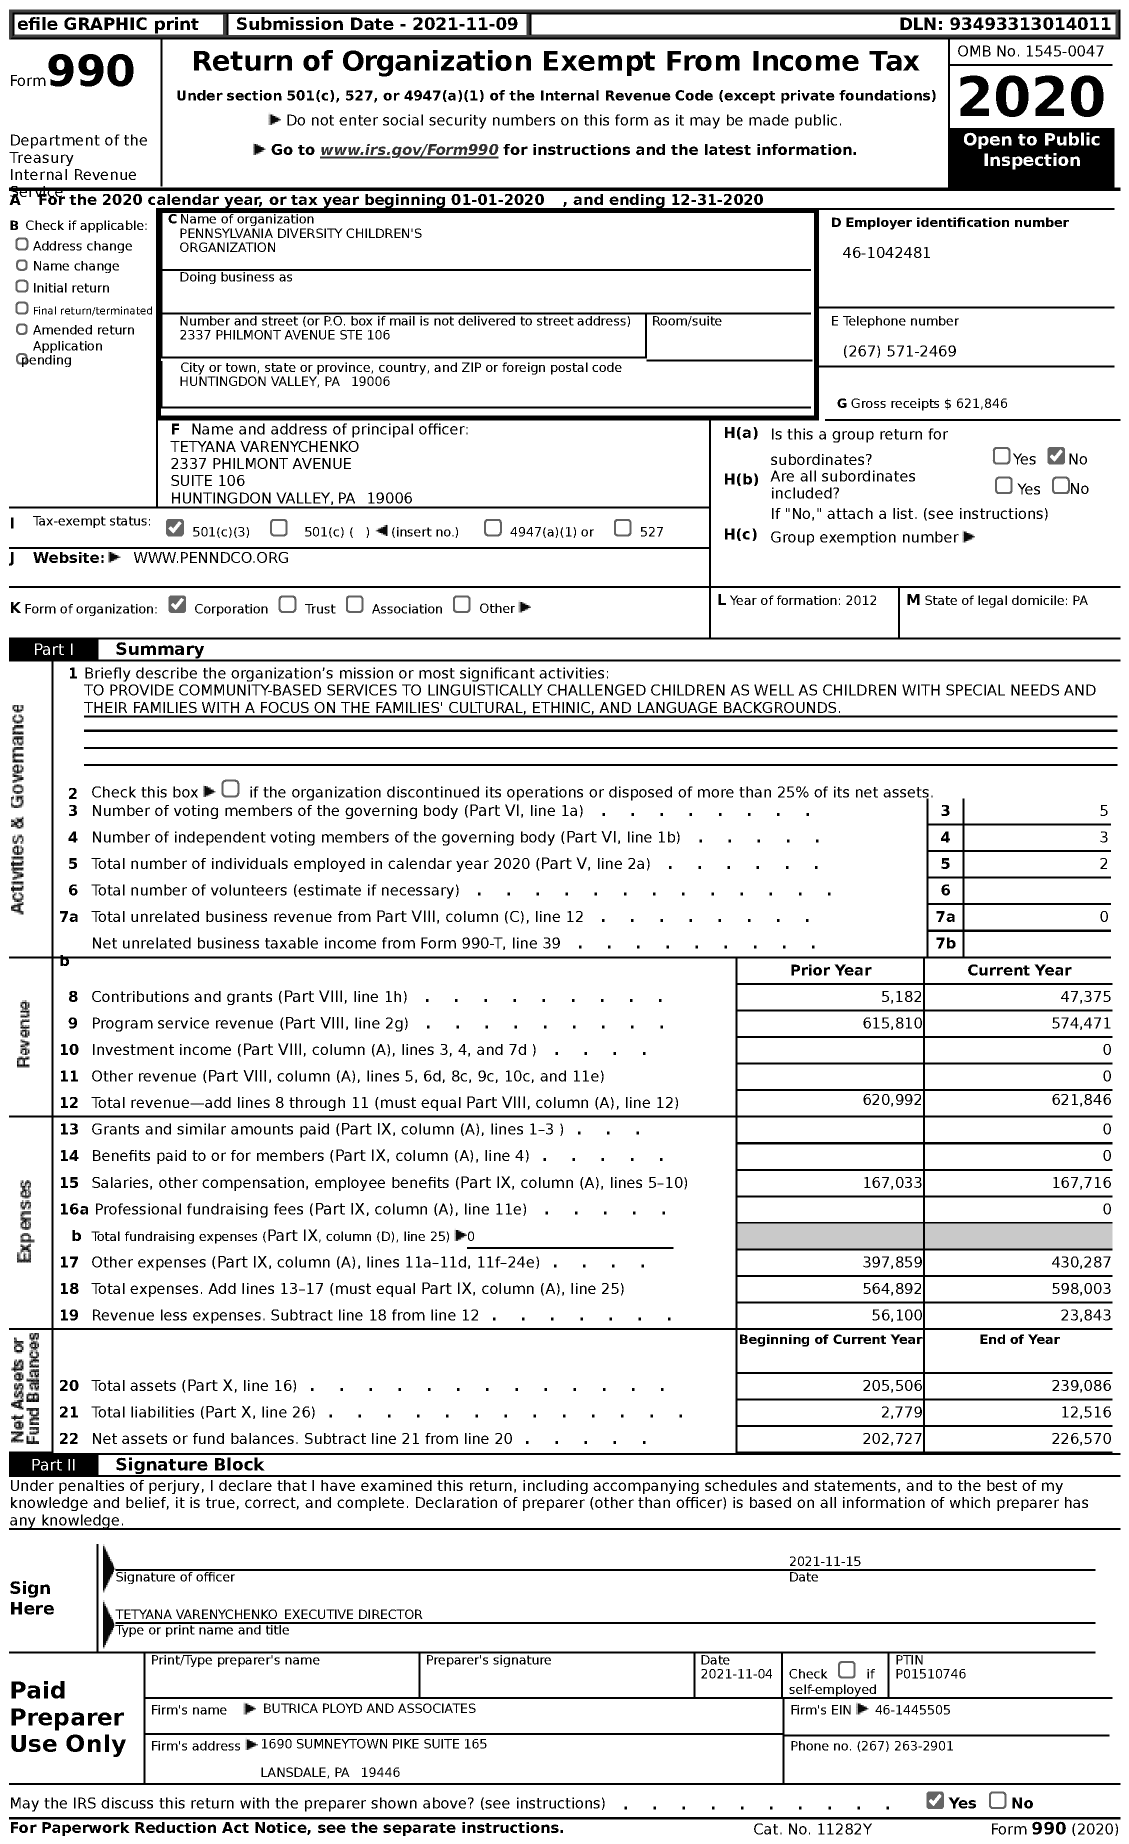 Image of first page of 2020 Form 990 for Pennsylvania Diversity Children's Organization